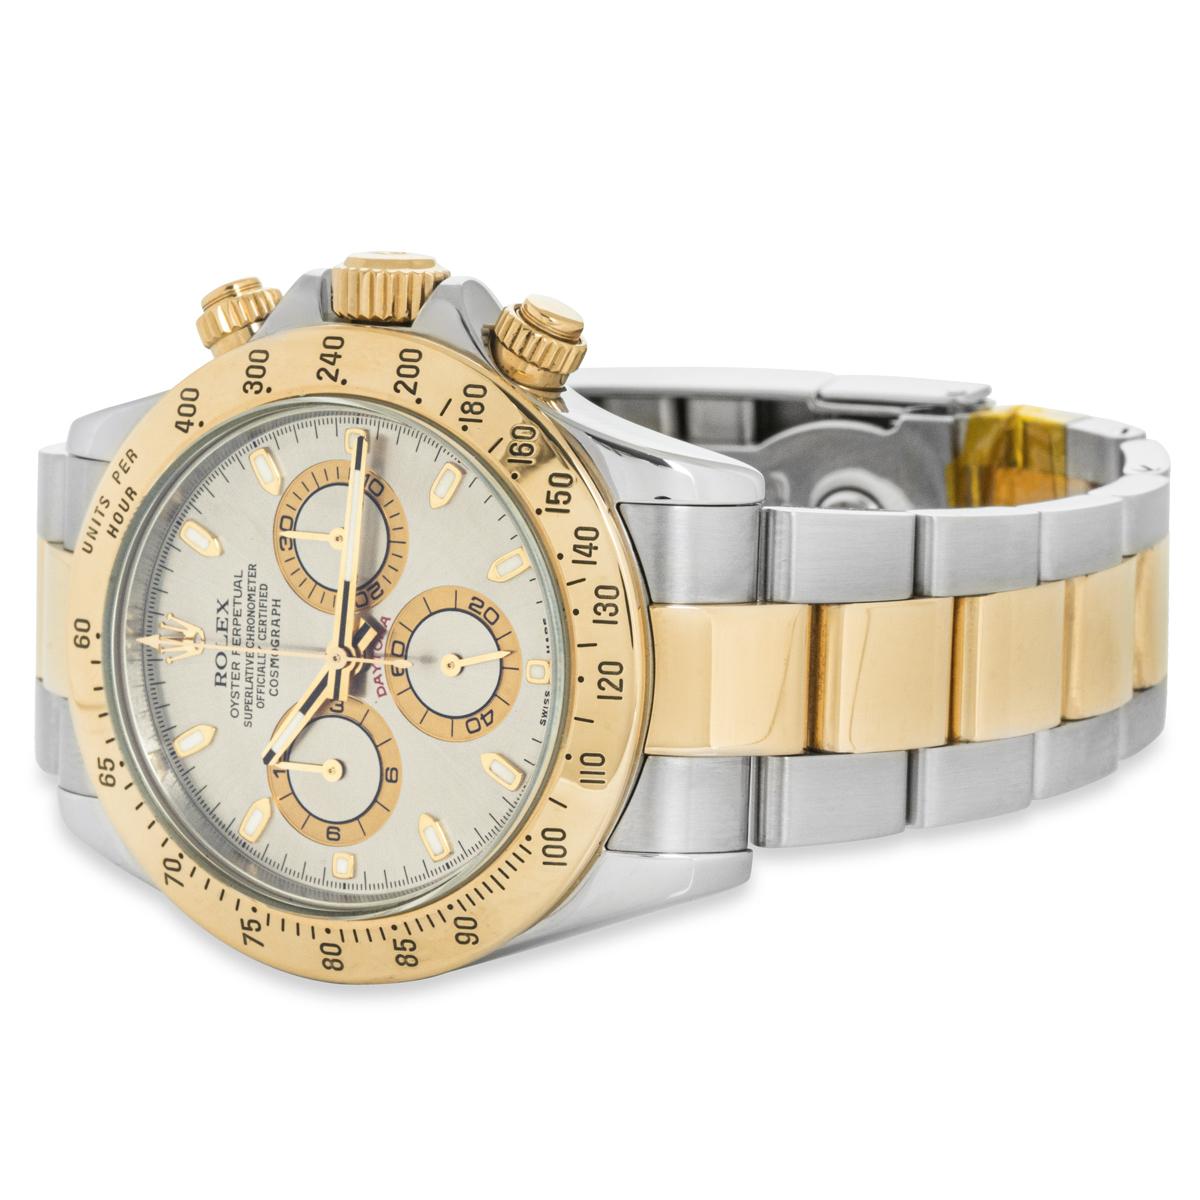 Rolex Daytona Grey Dial Steel and Gold 116523 1